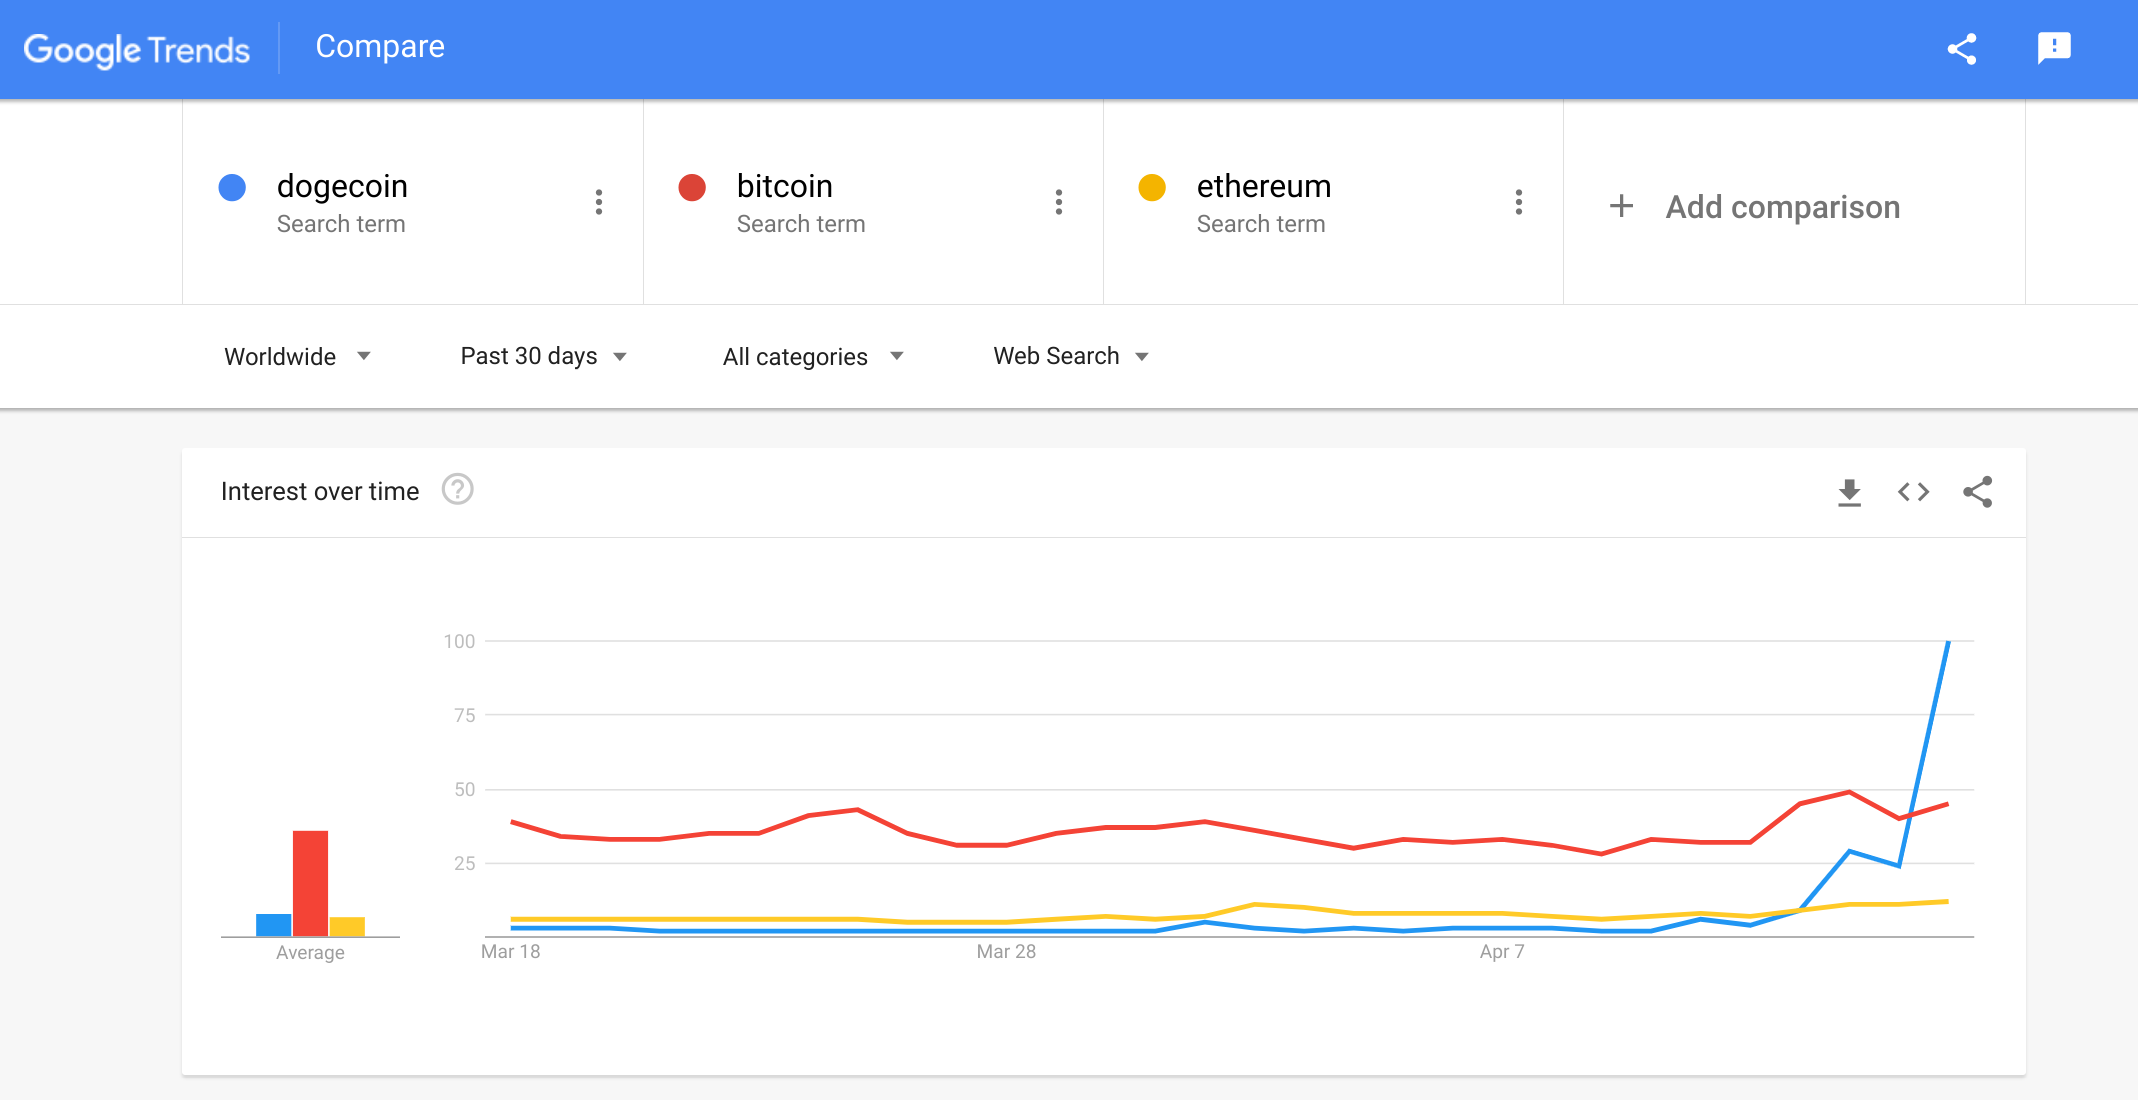 Google trends showing search trends of Dogecoin, Bitcoin and Ethereum for the past 30 days